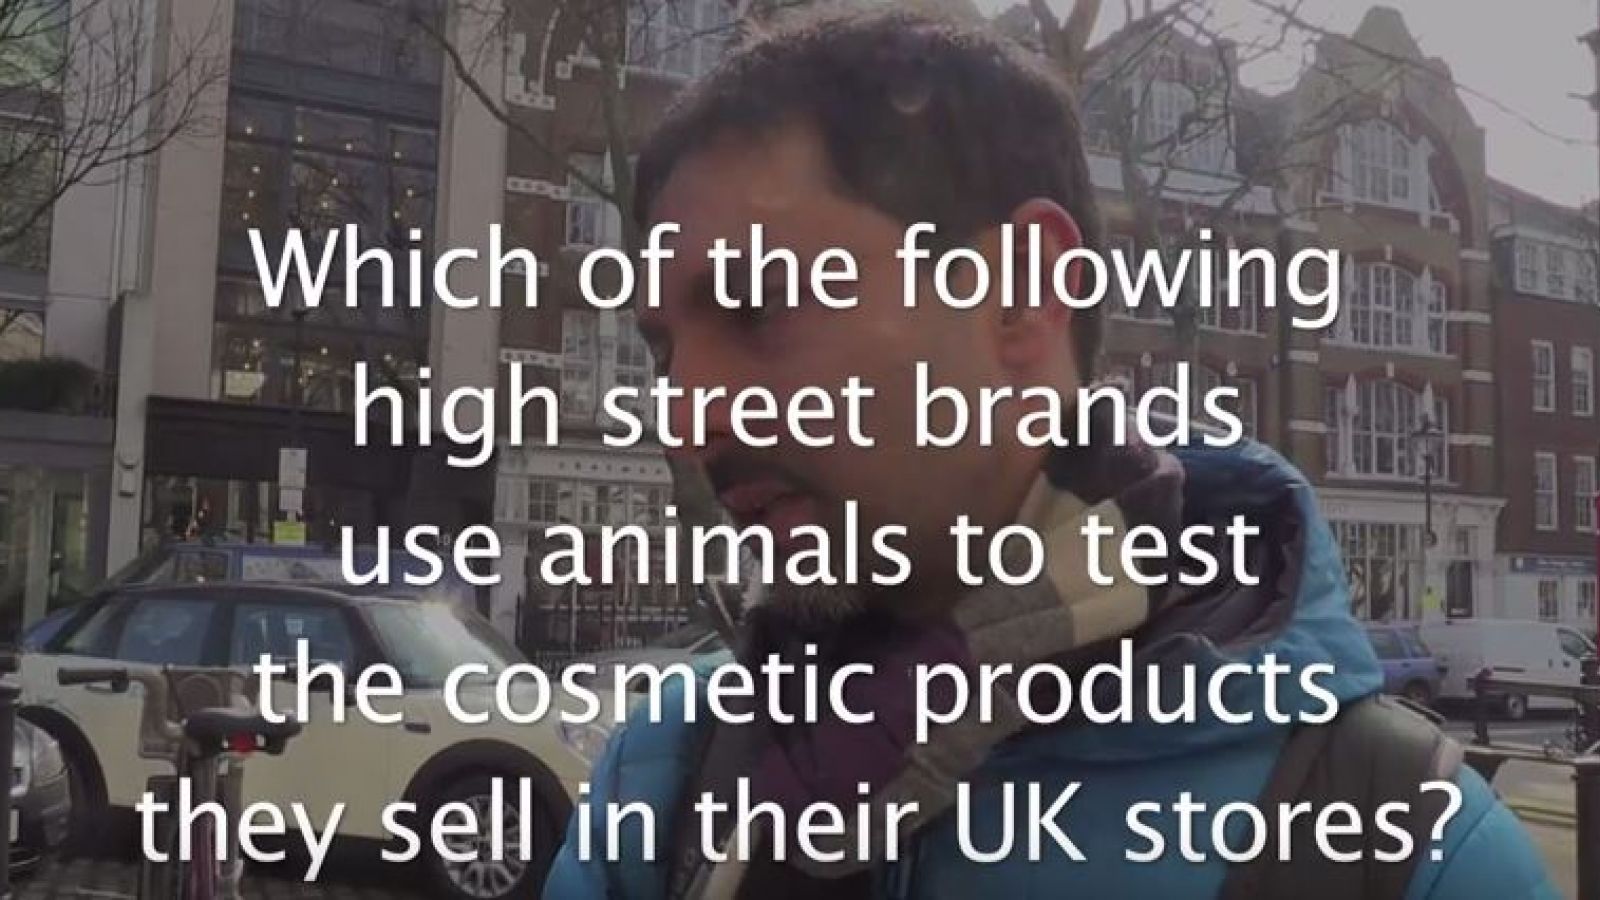 British public misled over cosmetic tests